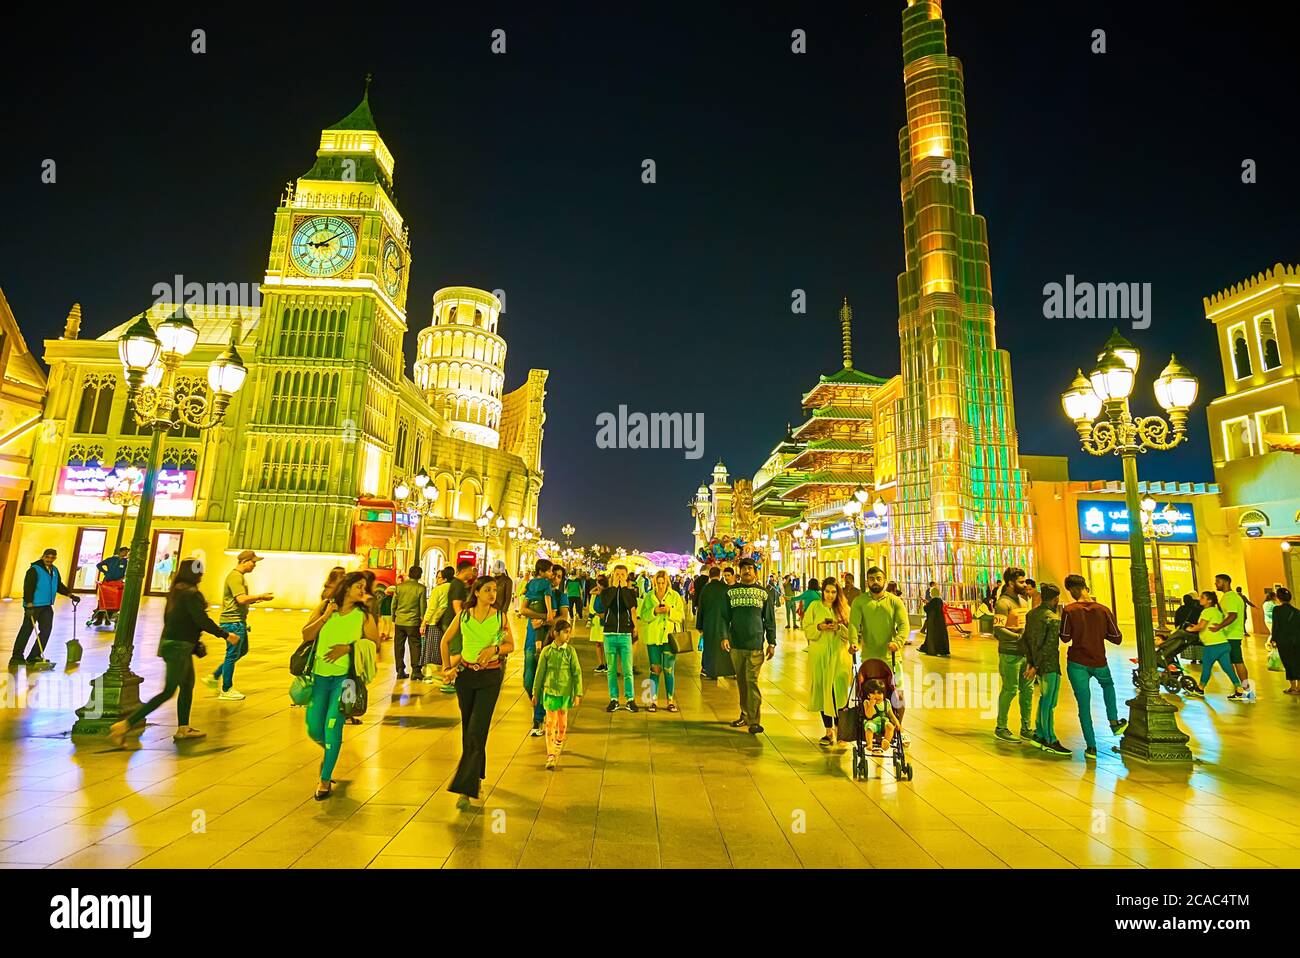 DUBAI, UAE - MARCH 5, 2020: The whole world is placed in one alley of Global Village - here is London Big Ben, Dubai Burj Khalifa, Pisa Leaning Tower, Stock Photo